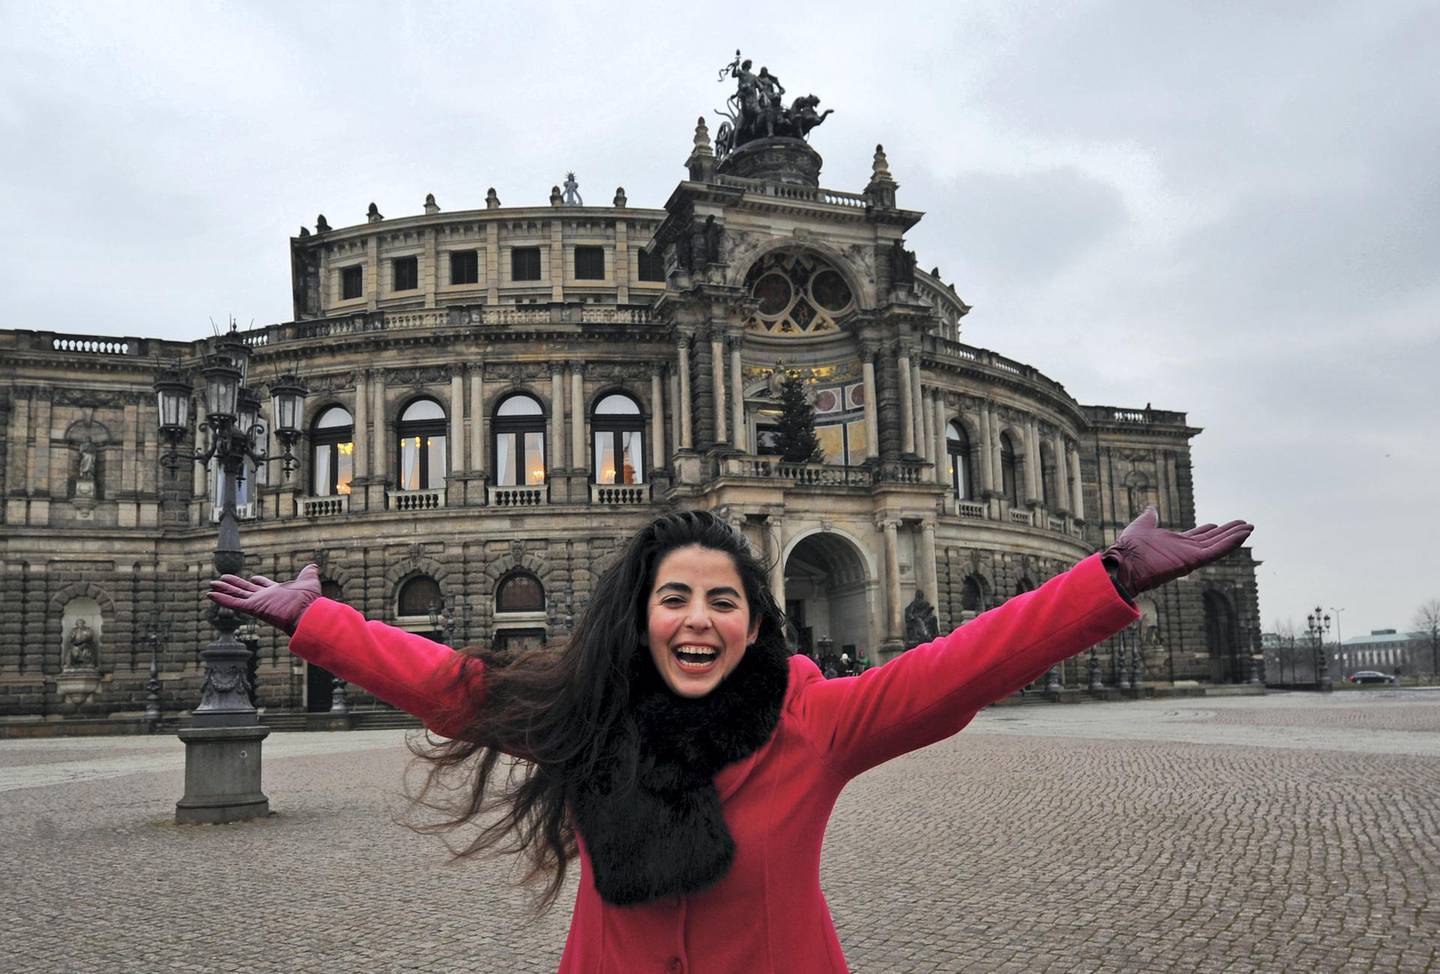 Egyptian mezzo soprano Gala El Hadidi poses in front of the Semper opera house in Dresden, Germany, 01 December 2014. Photo: Matthias Hiekel/dpa | usage worldwide   (Photo by Matthias Hiekel/picture alliance via Getty Images)